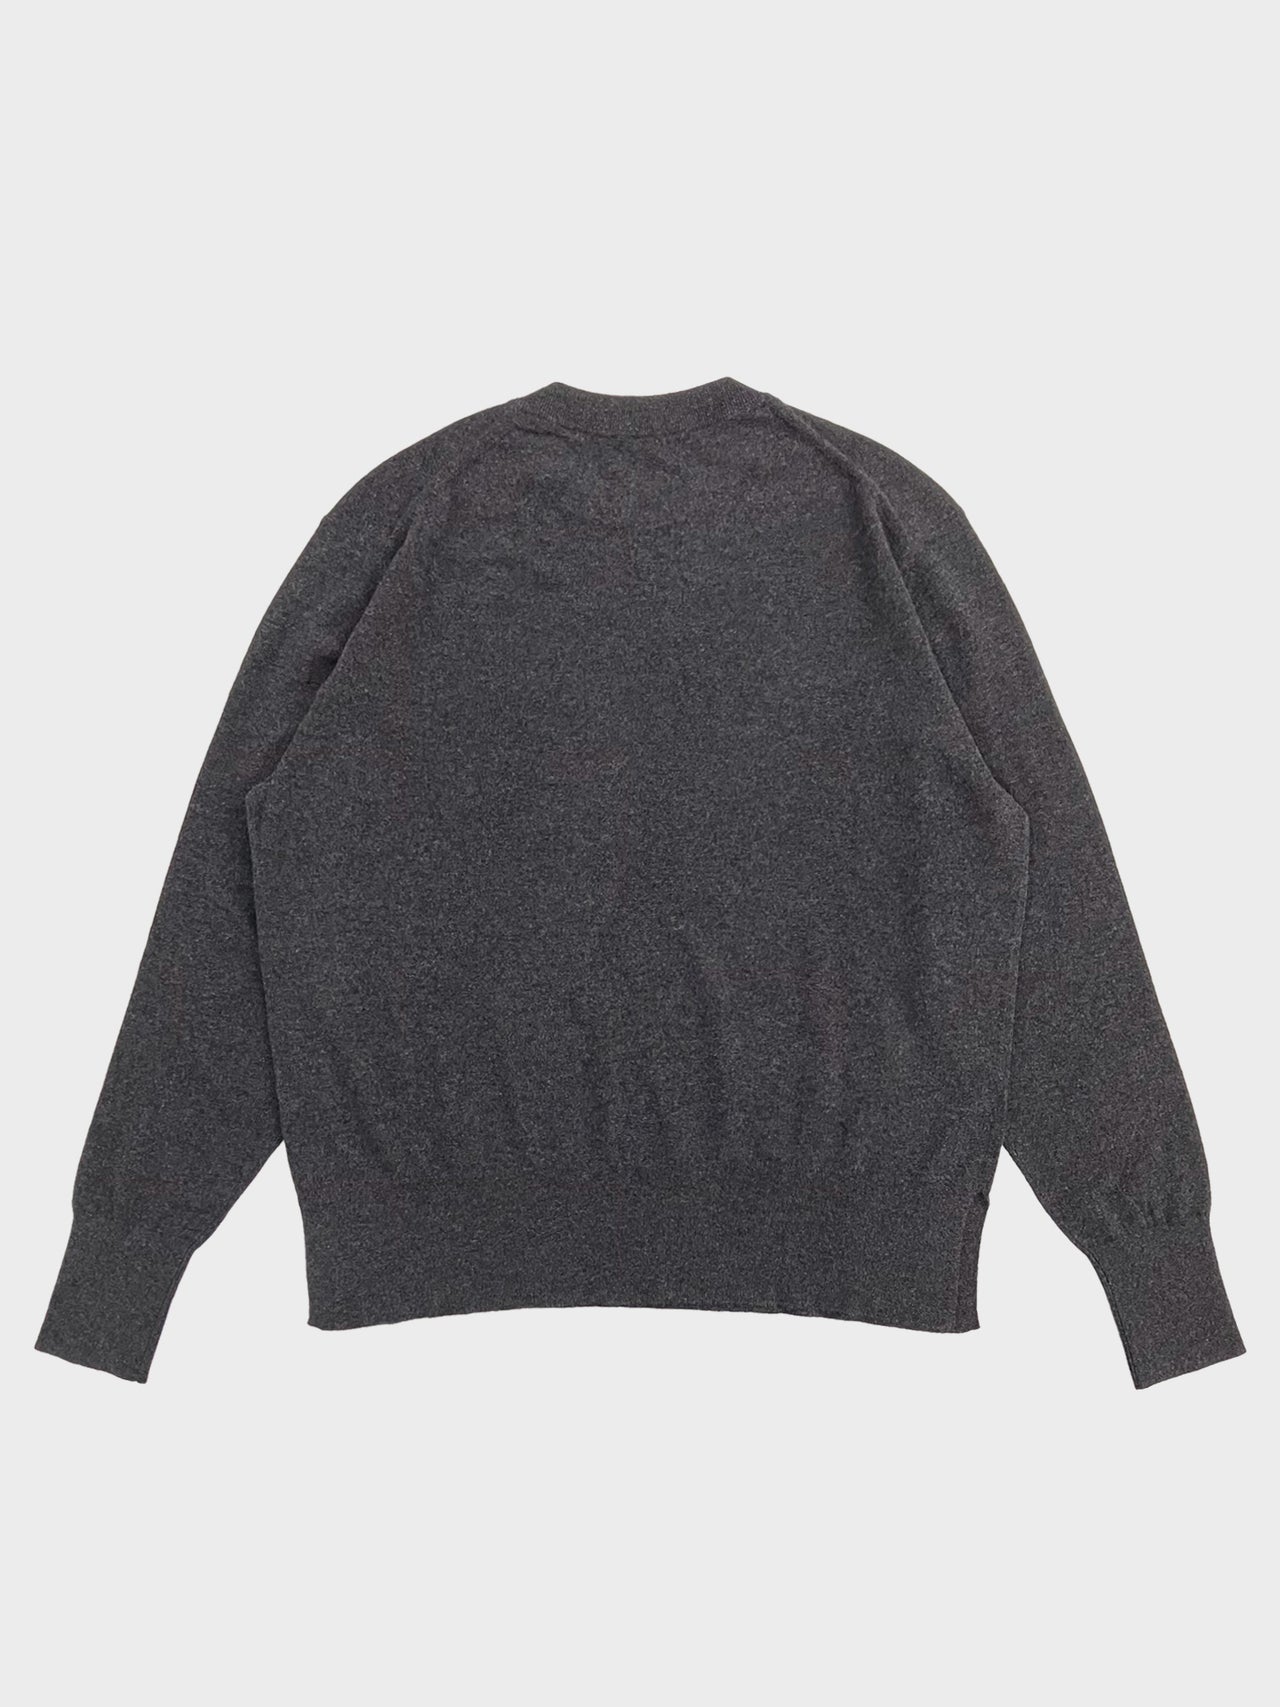 PICEA / 14GG CREW NECK KNIT (CHARCOAL)